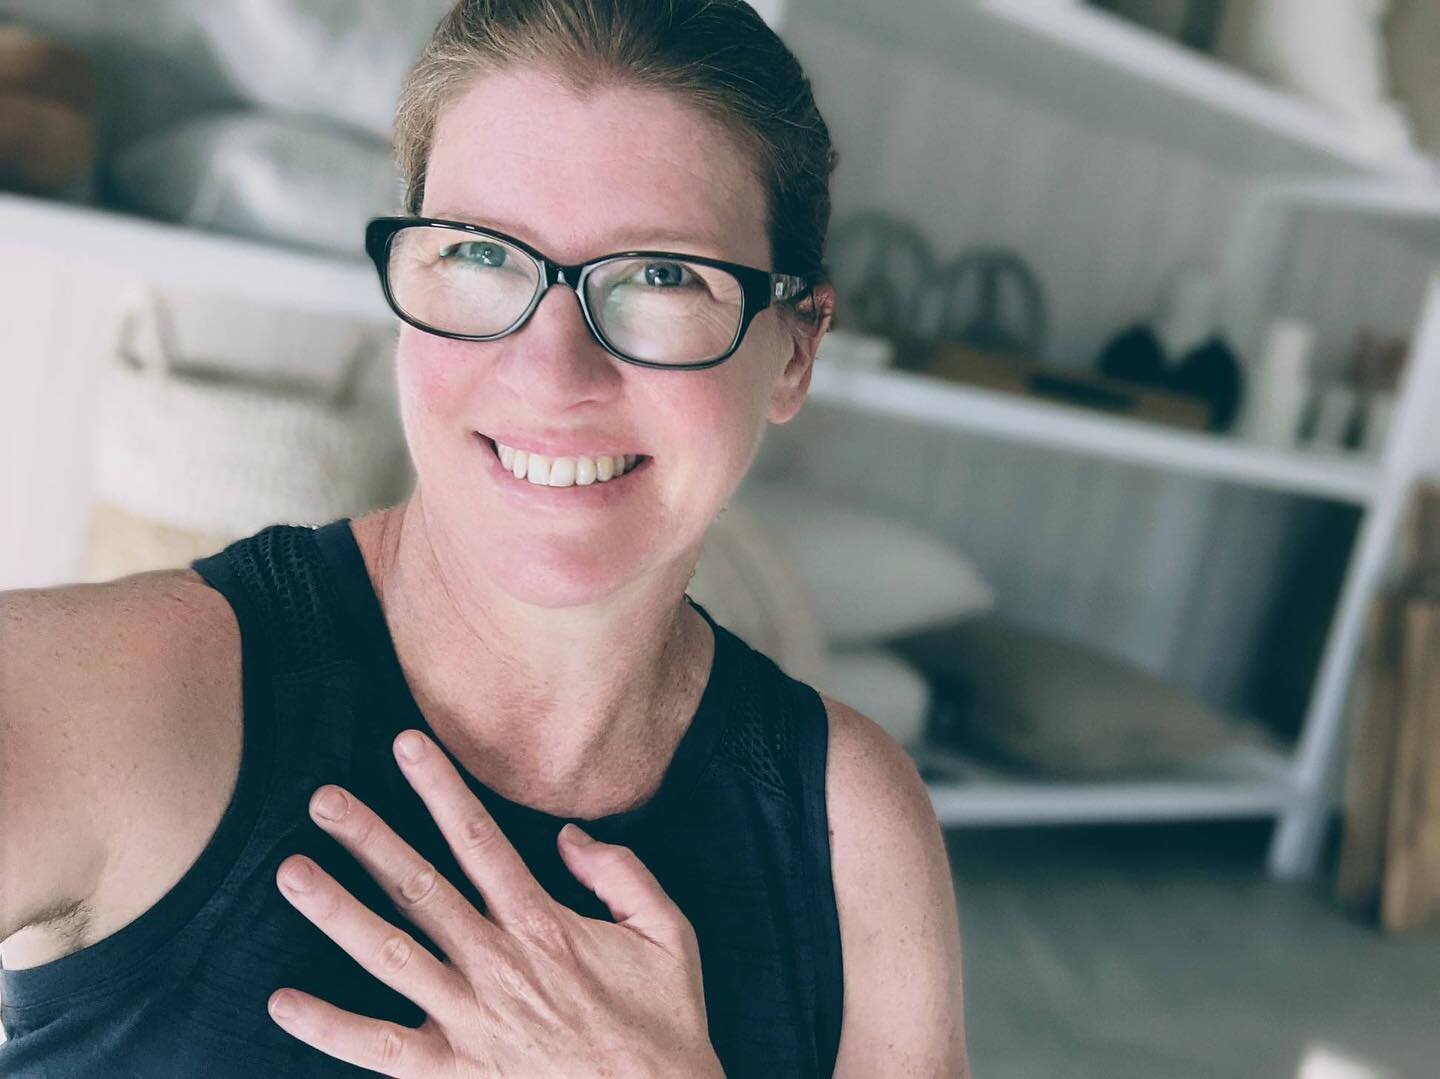 🌻We just adore @bykarendargan at @lotusbayyoga sharing yoga on Mondays 6pm and a bunch of Saturdays 7.30am this spring 🌼 

Lotus Bay Yoga is our community yoga practice hosted by @driftwood_living homewares on the roundabout Anzac Pde in the heart 